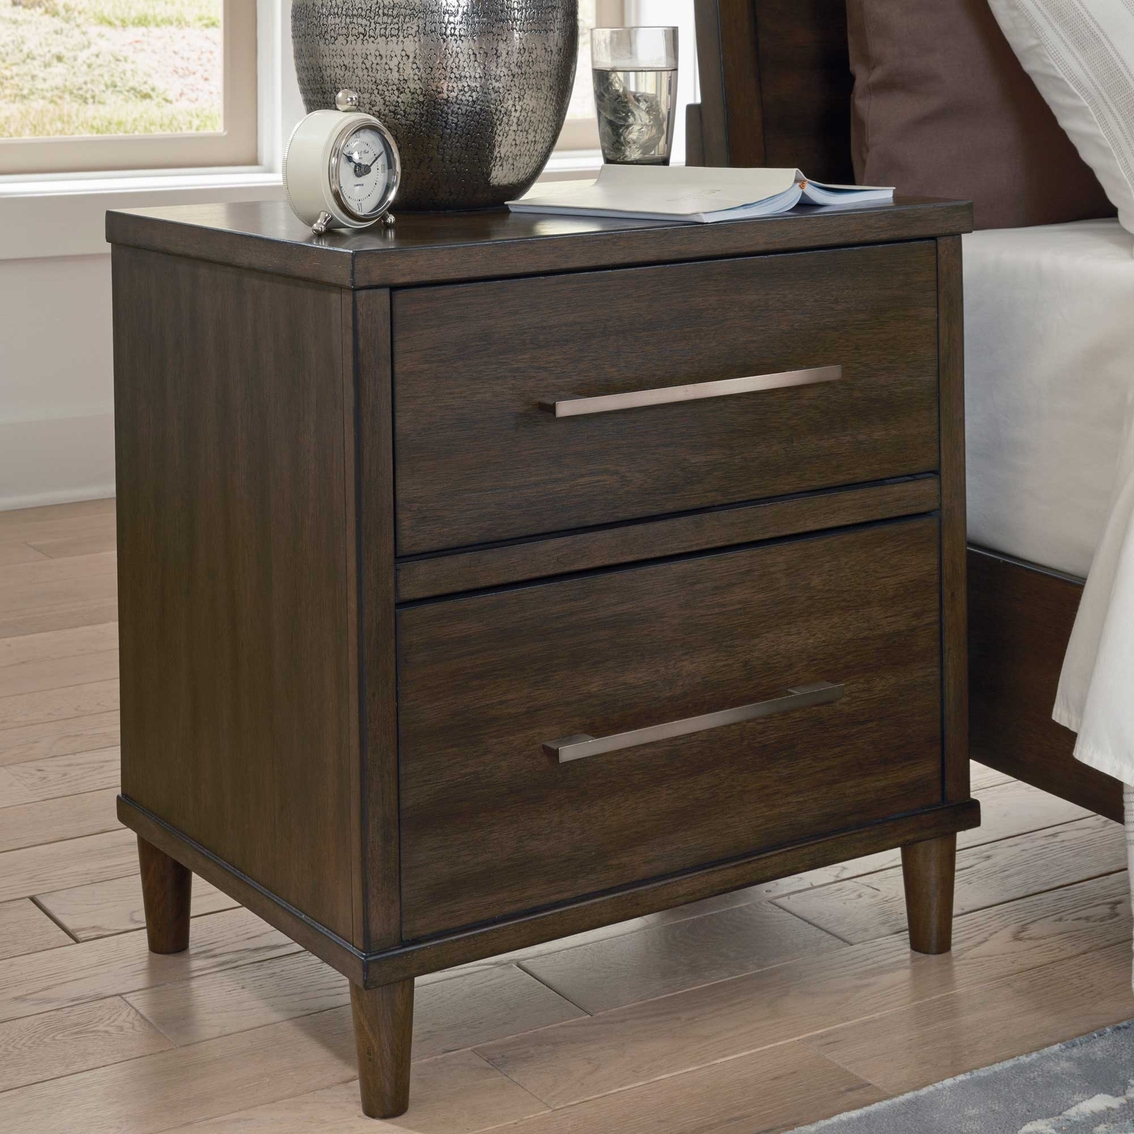 Signature Design by Ashley Wittland Nightstand - Image 6 of 7